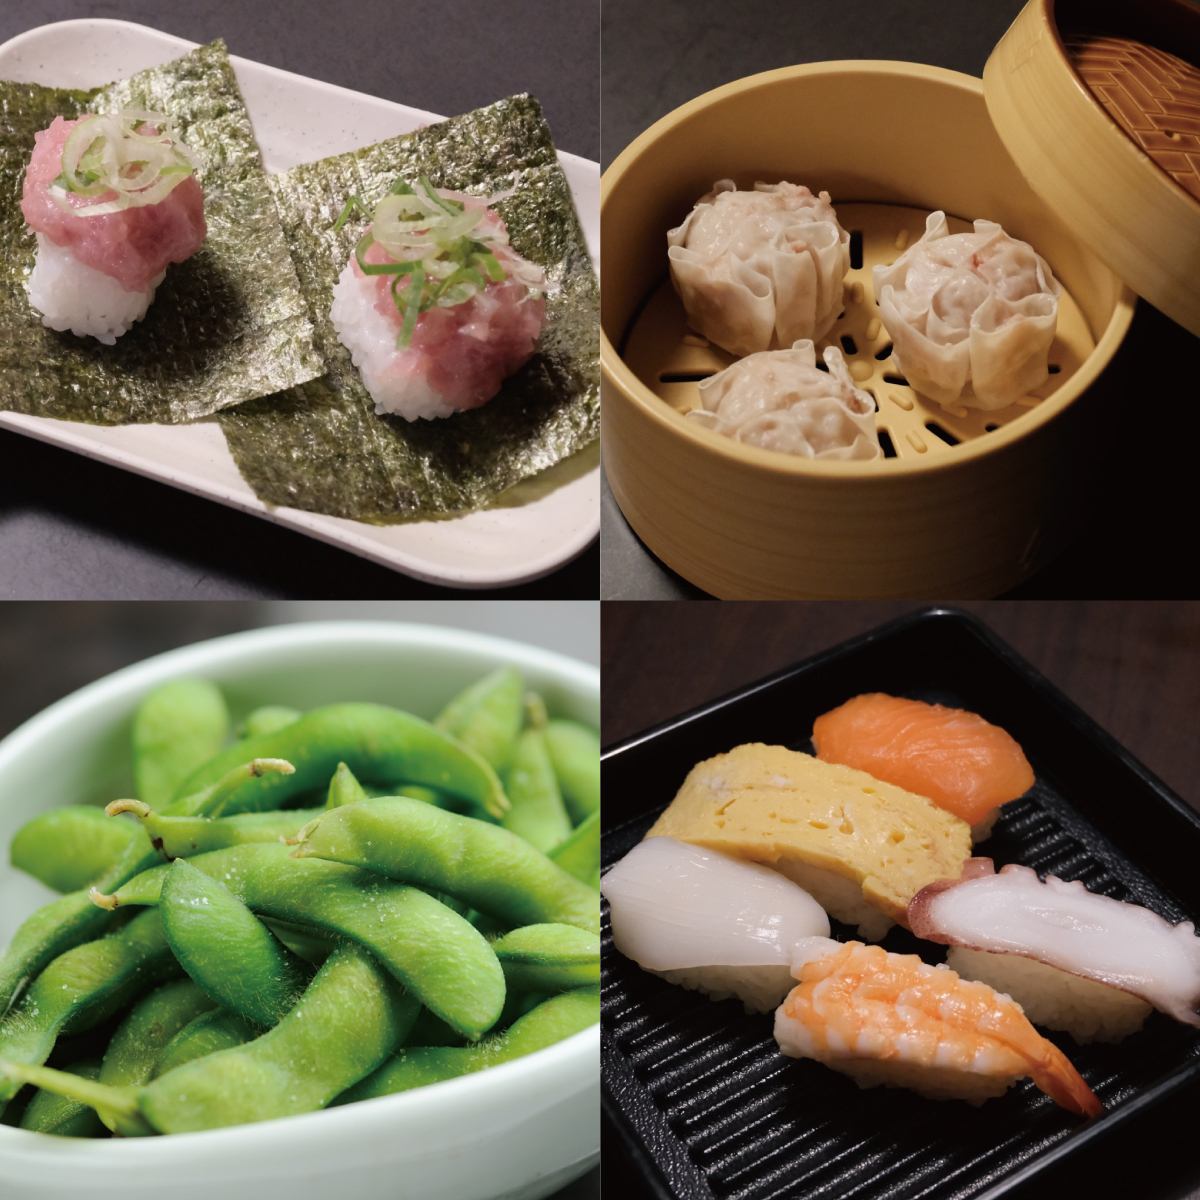 All-you-can-eat seafood menu such as sushi and snacks!